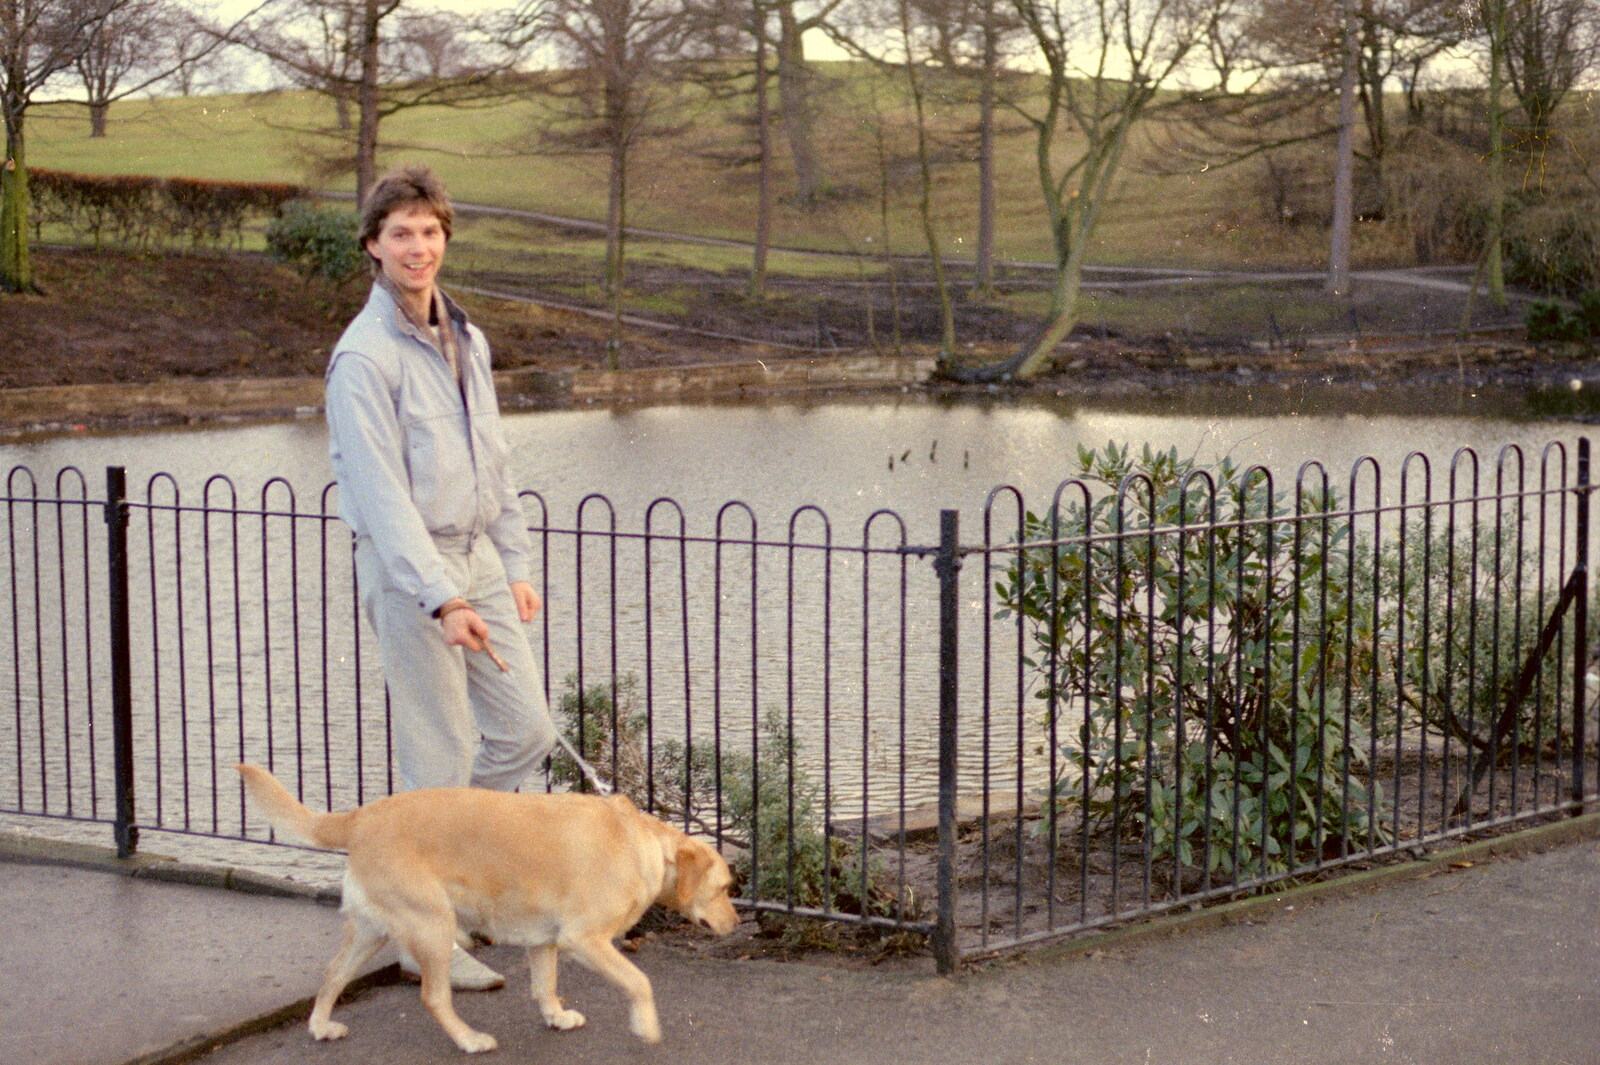 Sean takes Brandy for a walk from Easter With Sean in Macclesfield, Cheshire - 6th April 1986